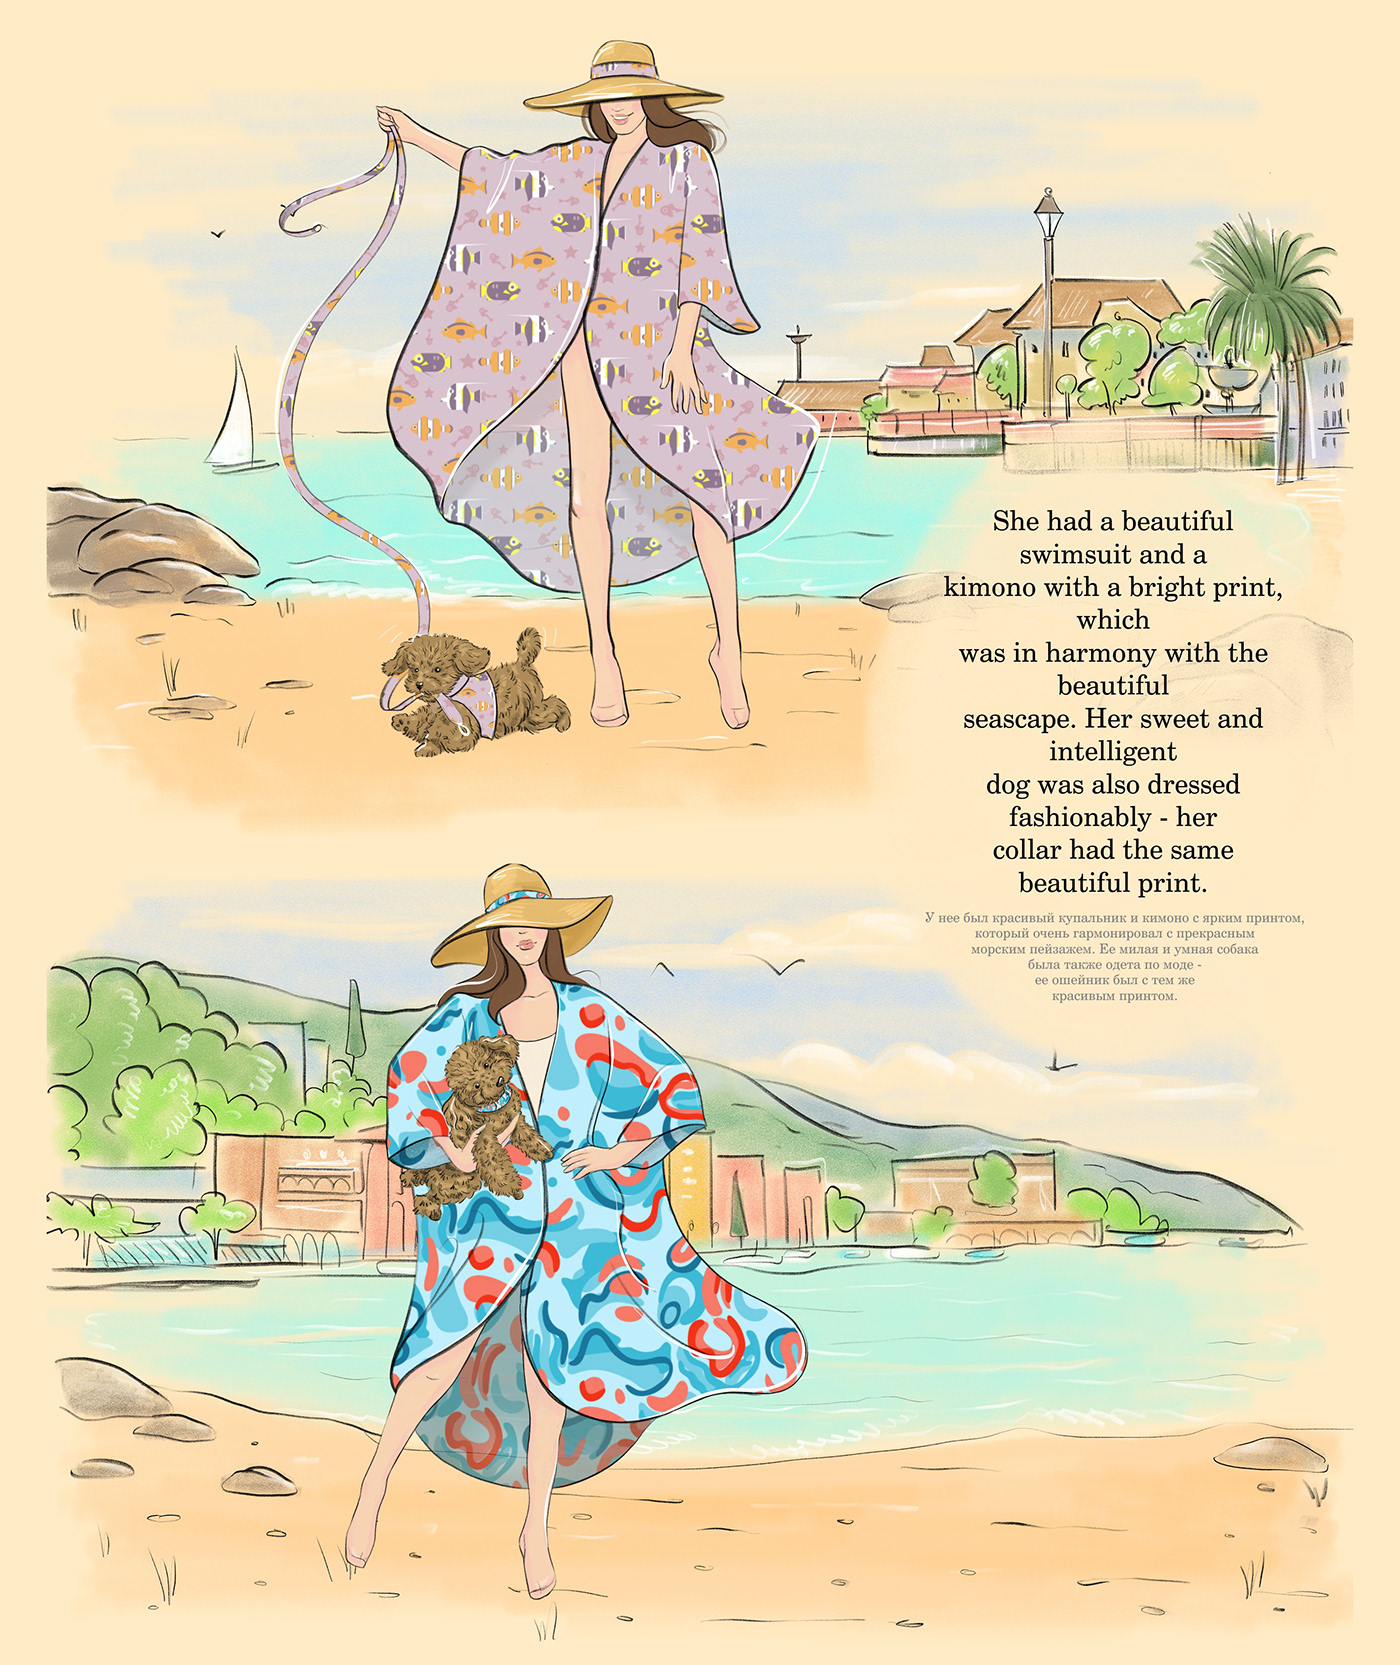 Illustration. A girl in a kimono with a dog on the beach. France. Textile design. Summer fashion.
